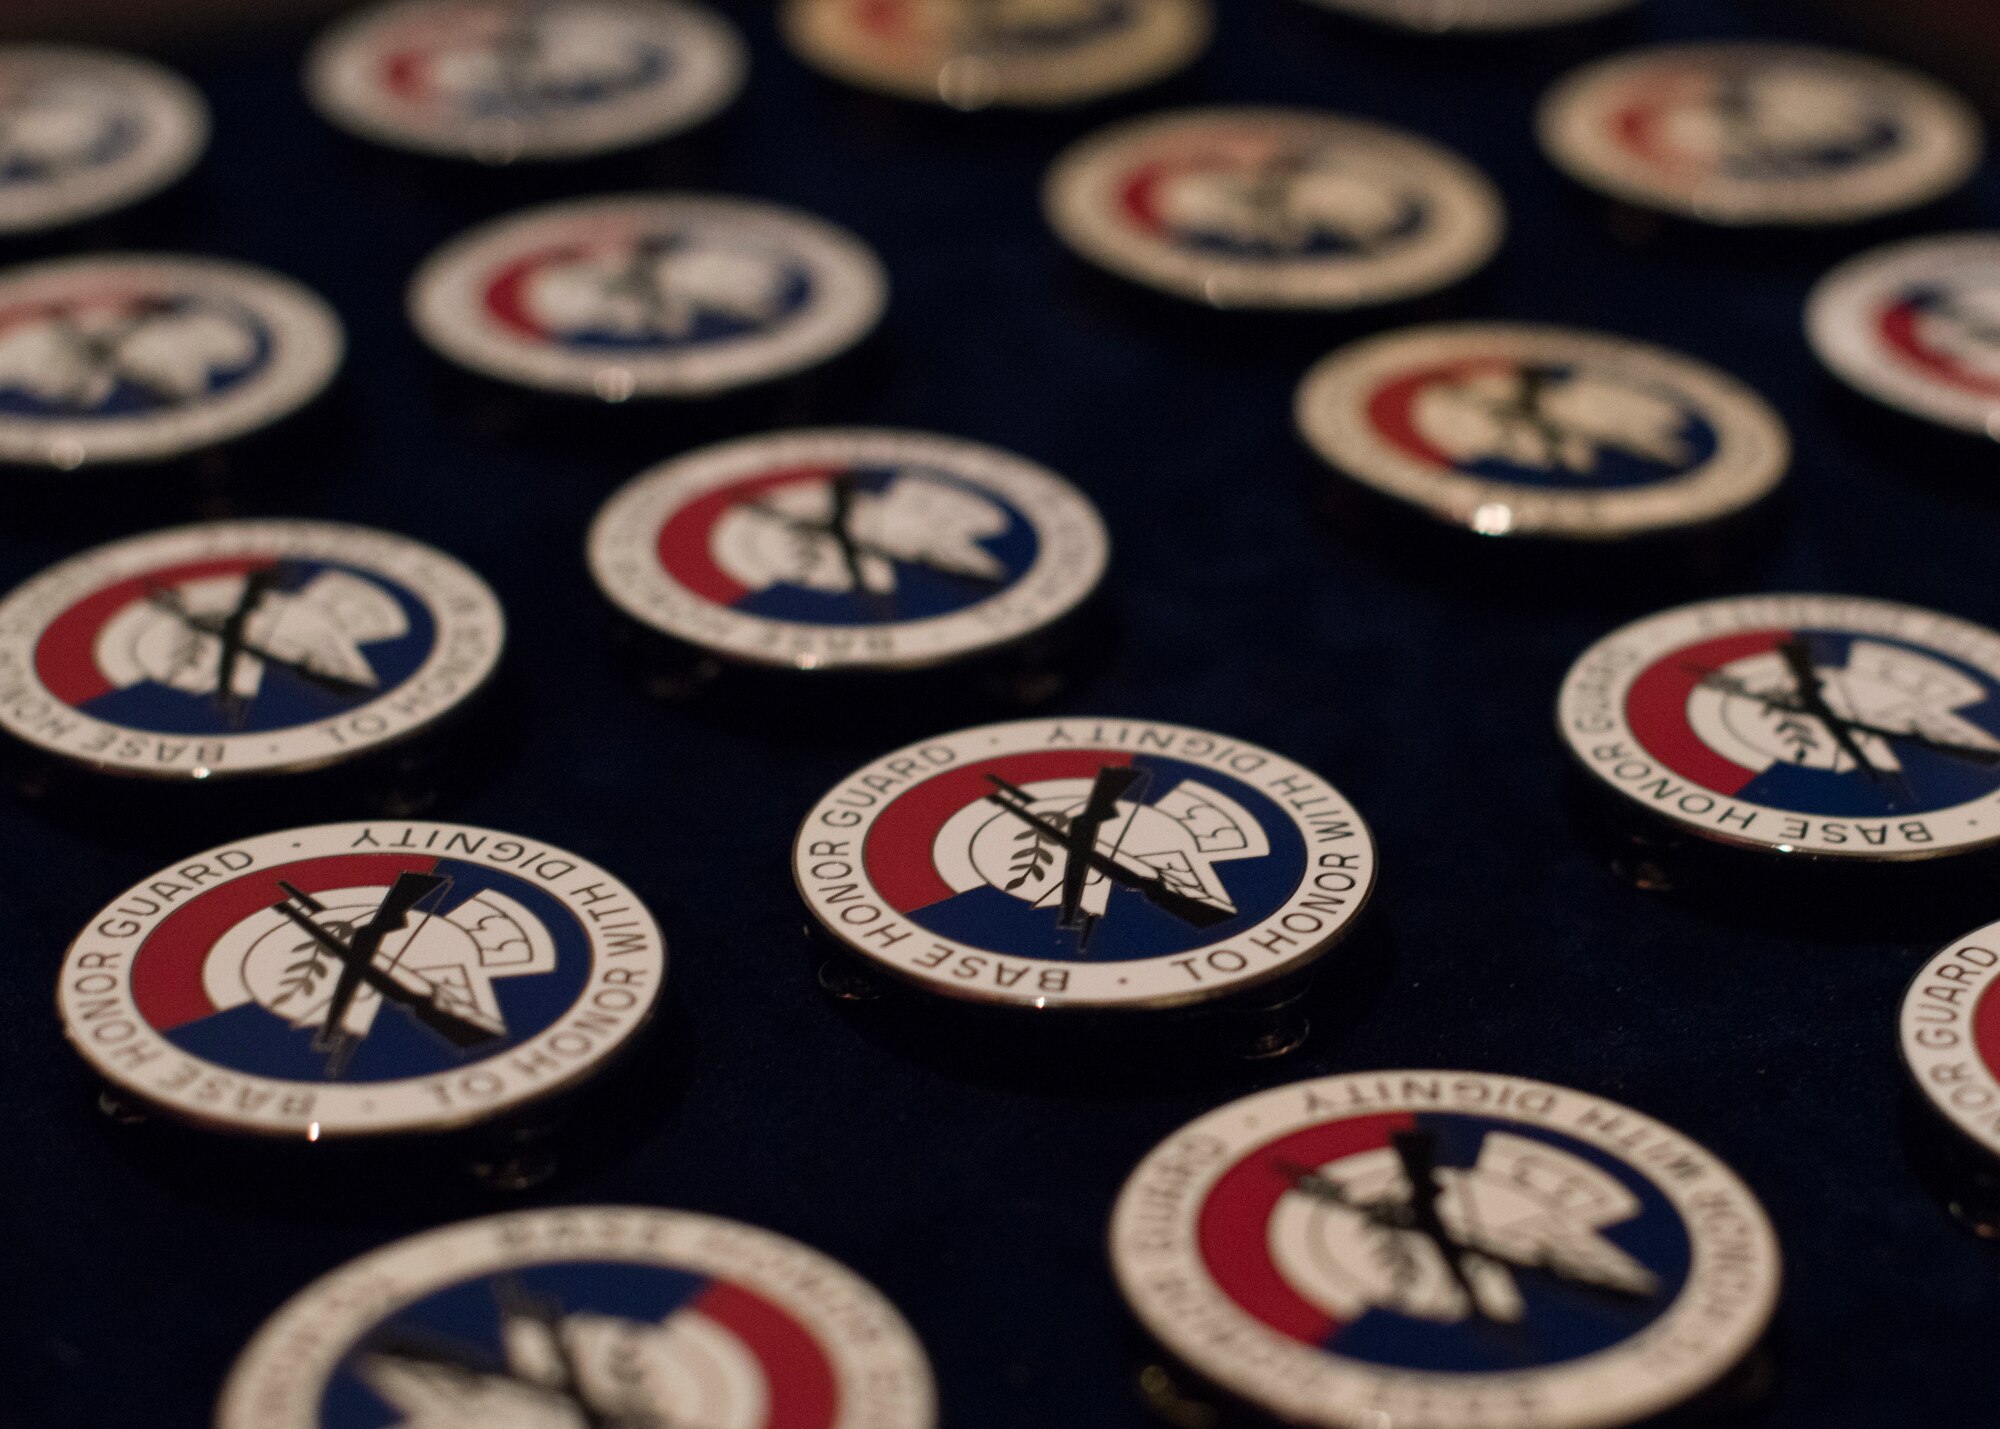 Base Honor Guard “cookies” sit ready to be given out during graduation at Fairchild Air Force Base, Washington, Aug. 10, 2018. “Cookies” are uniform badges that are worn on ceremonial uniforms to signify a base Honor Guardsman is fully trained and competent to perform military funeral honors. (U.S. Air Force photo/Senior Airman Ryan Lackey)